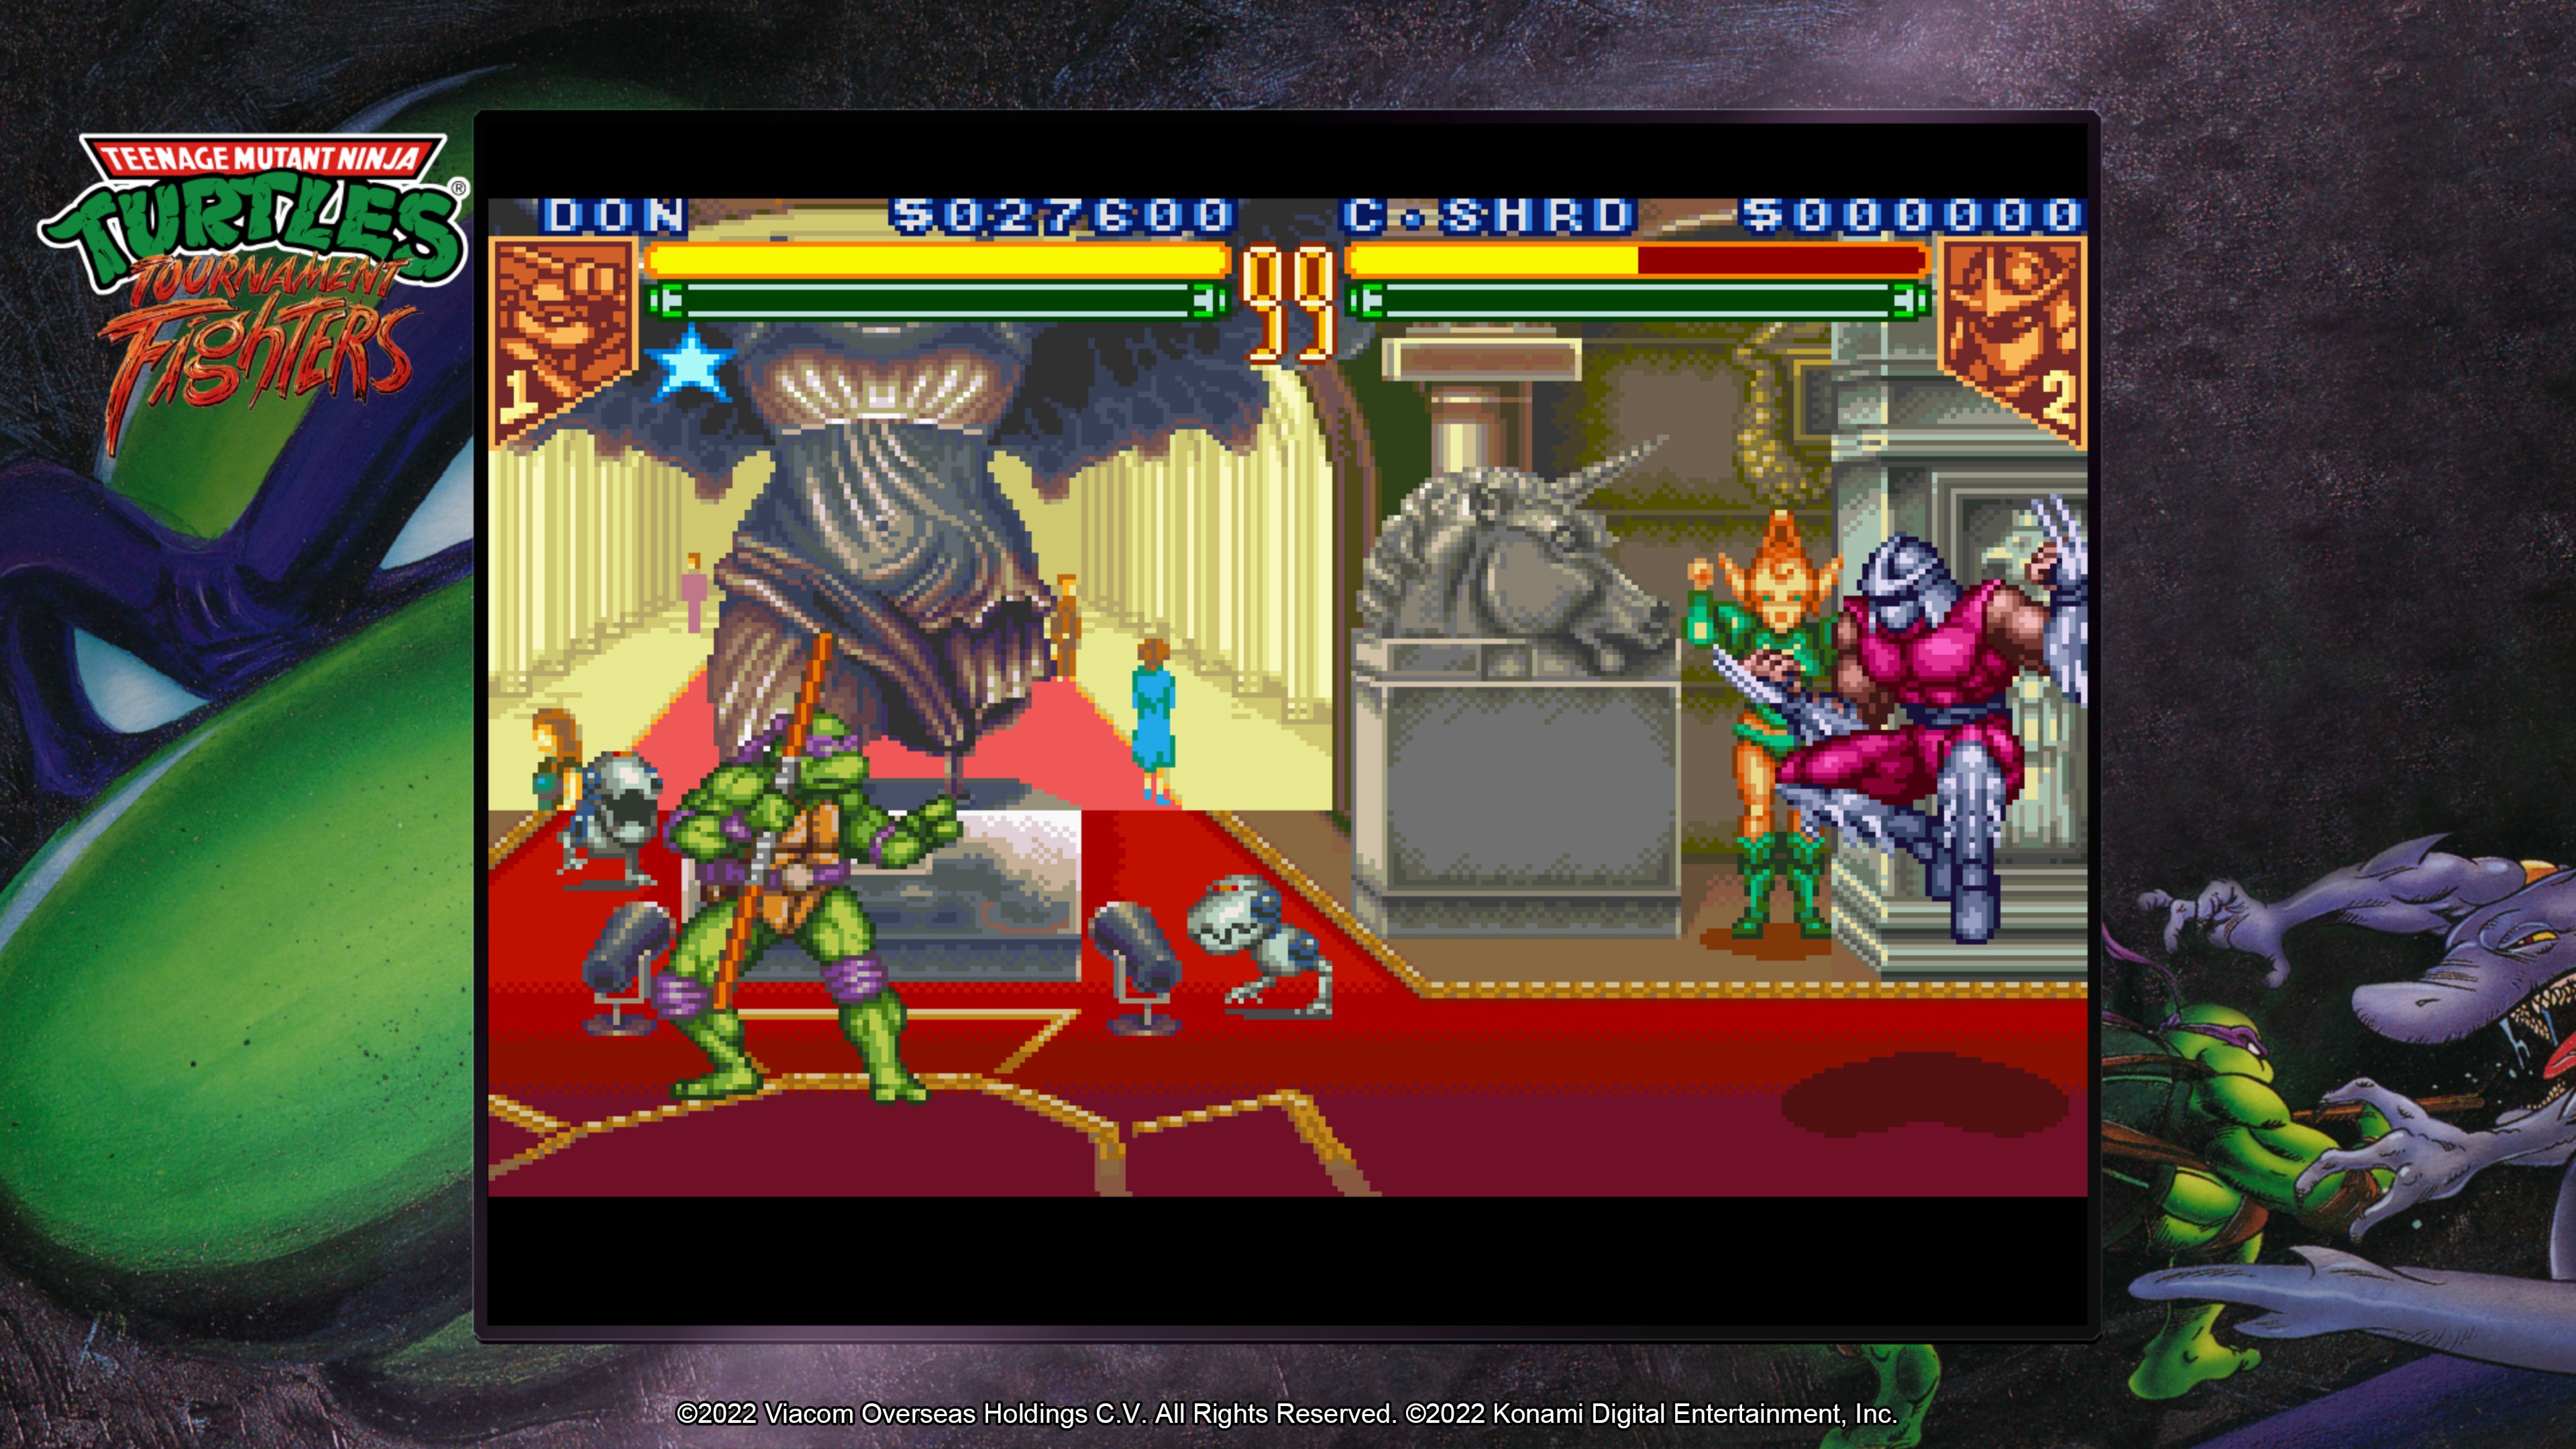 Donatello and Shredder fight in a screenshot of Teenage Mutant Ninja Turtles: Tournament Fighters from Teenage Mutant Ninja Turtles: The Cowabunga Collection.